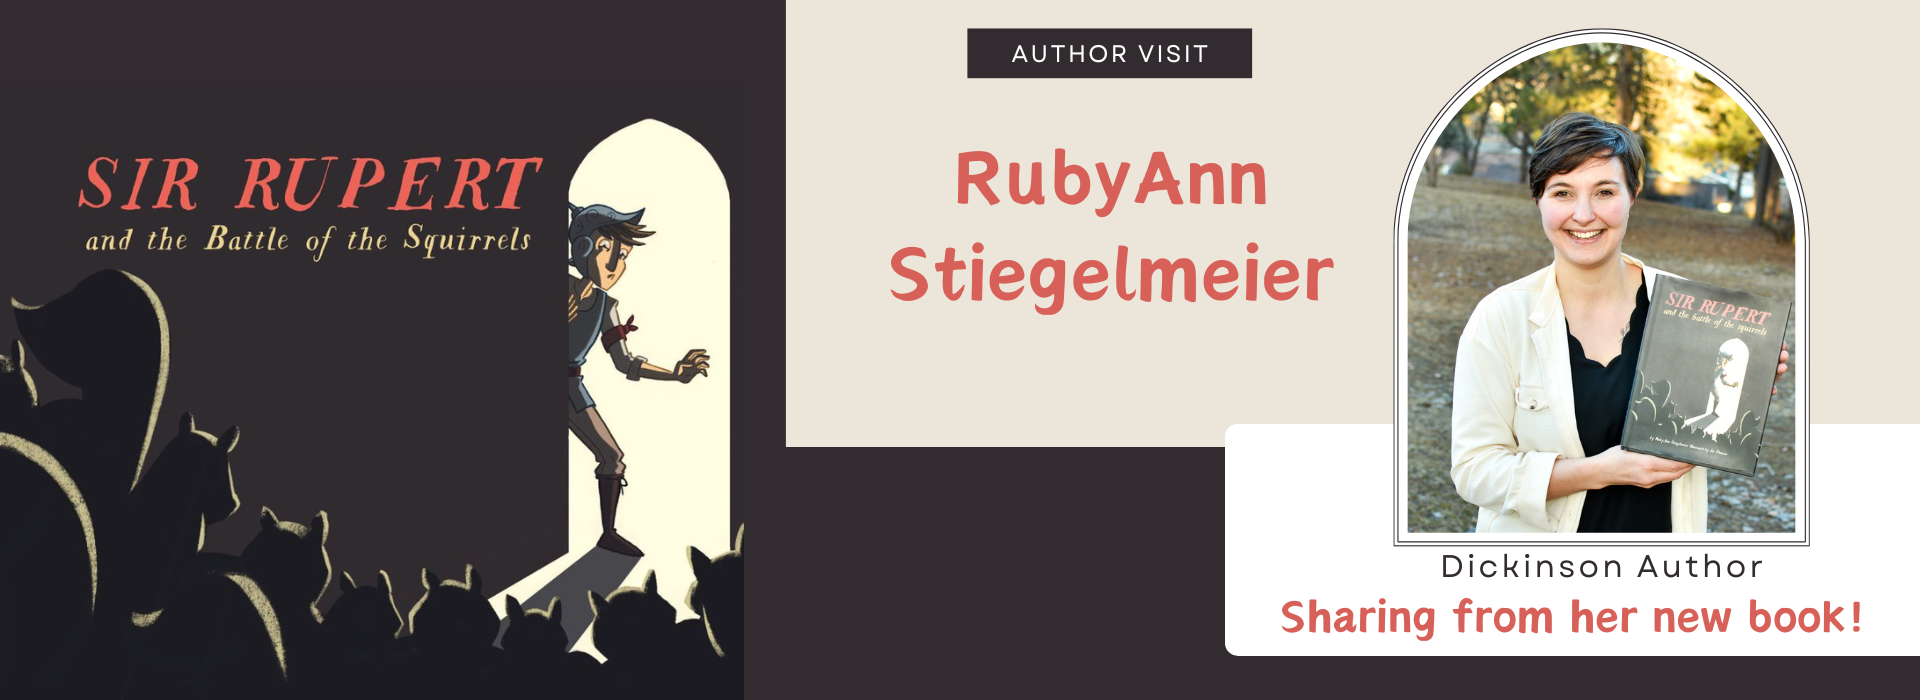 Author Visit with RubyAnn Stiegelmeier at 6pm on April 16th